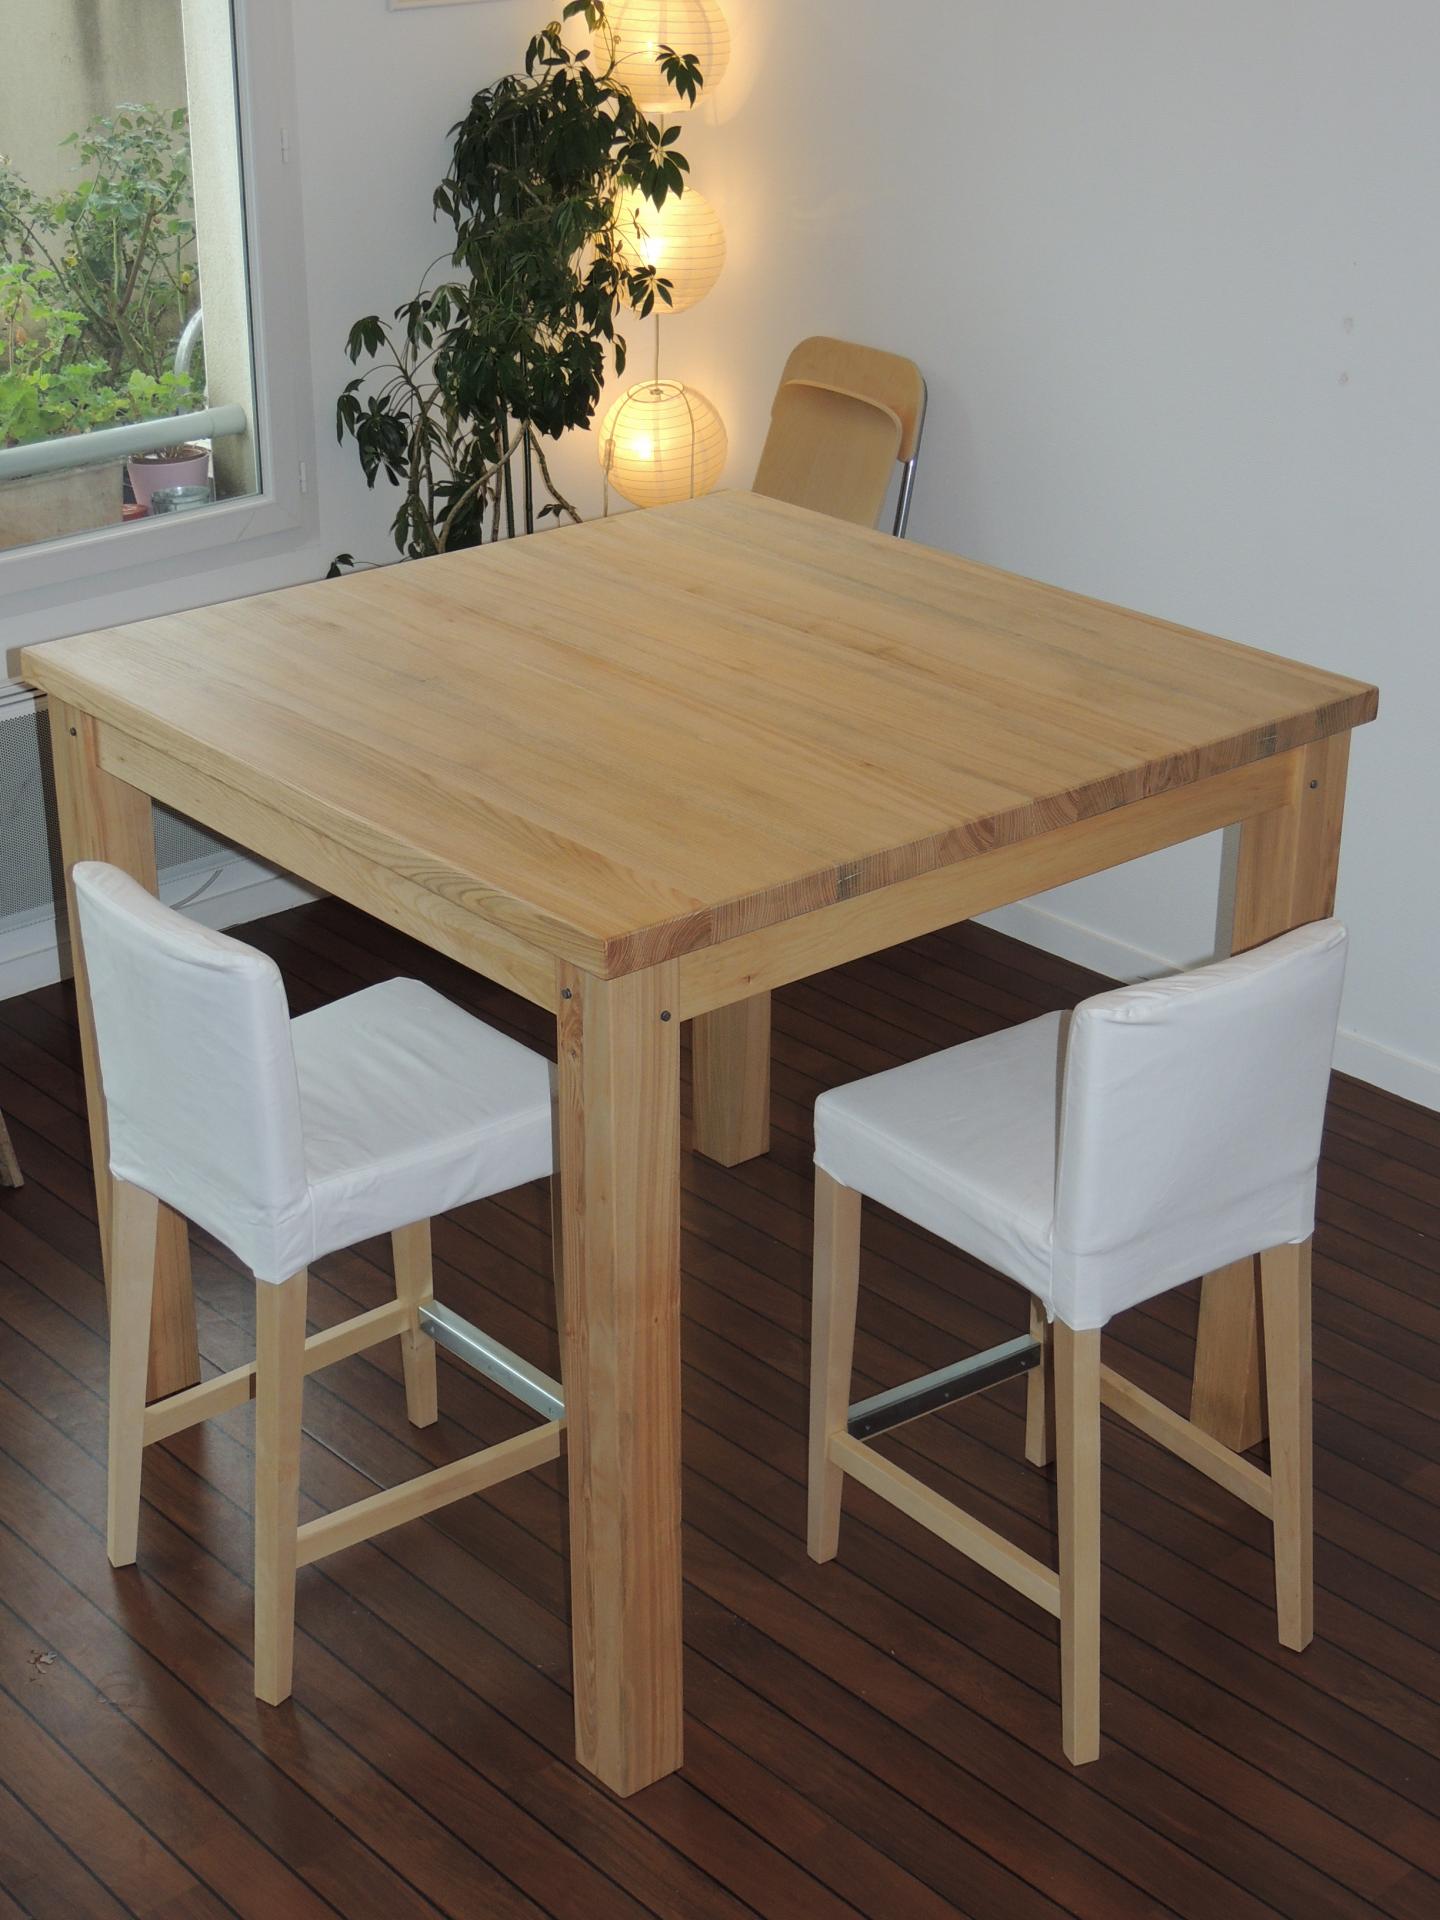 High table for Ikea chairs - www.ateliercannelle.com